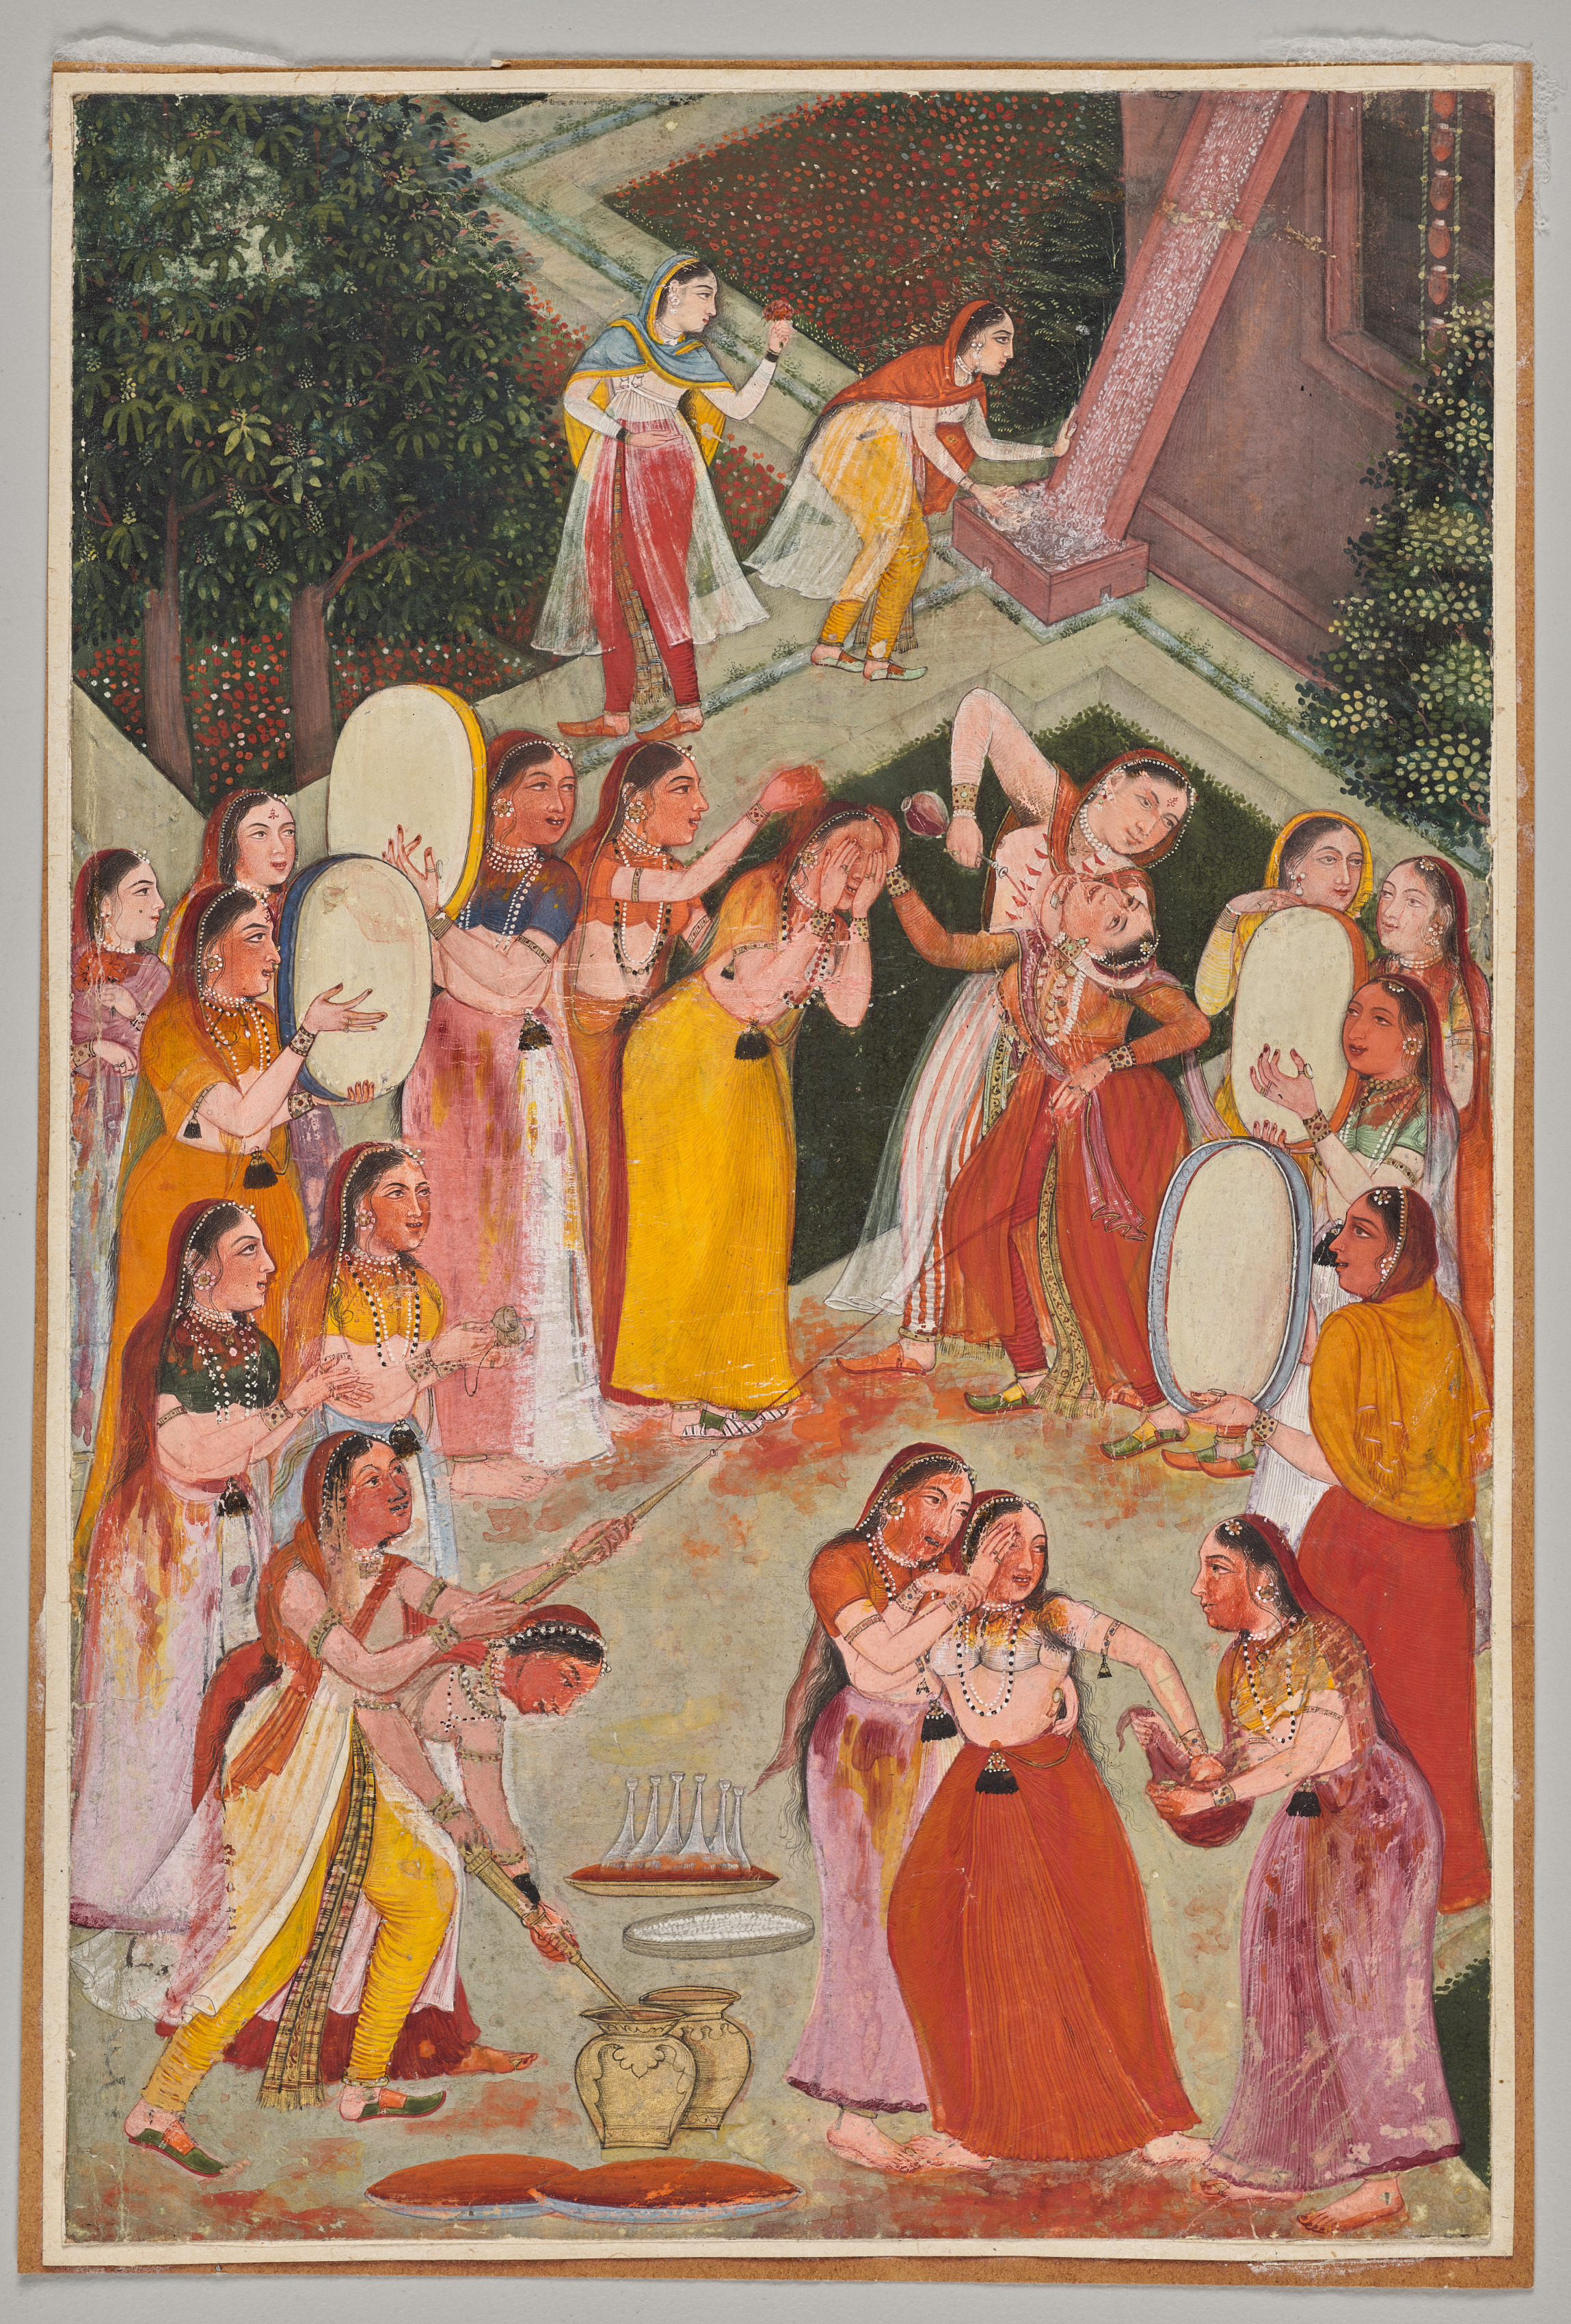 Girls Spraying Each Other at Holi